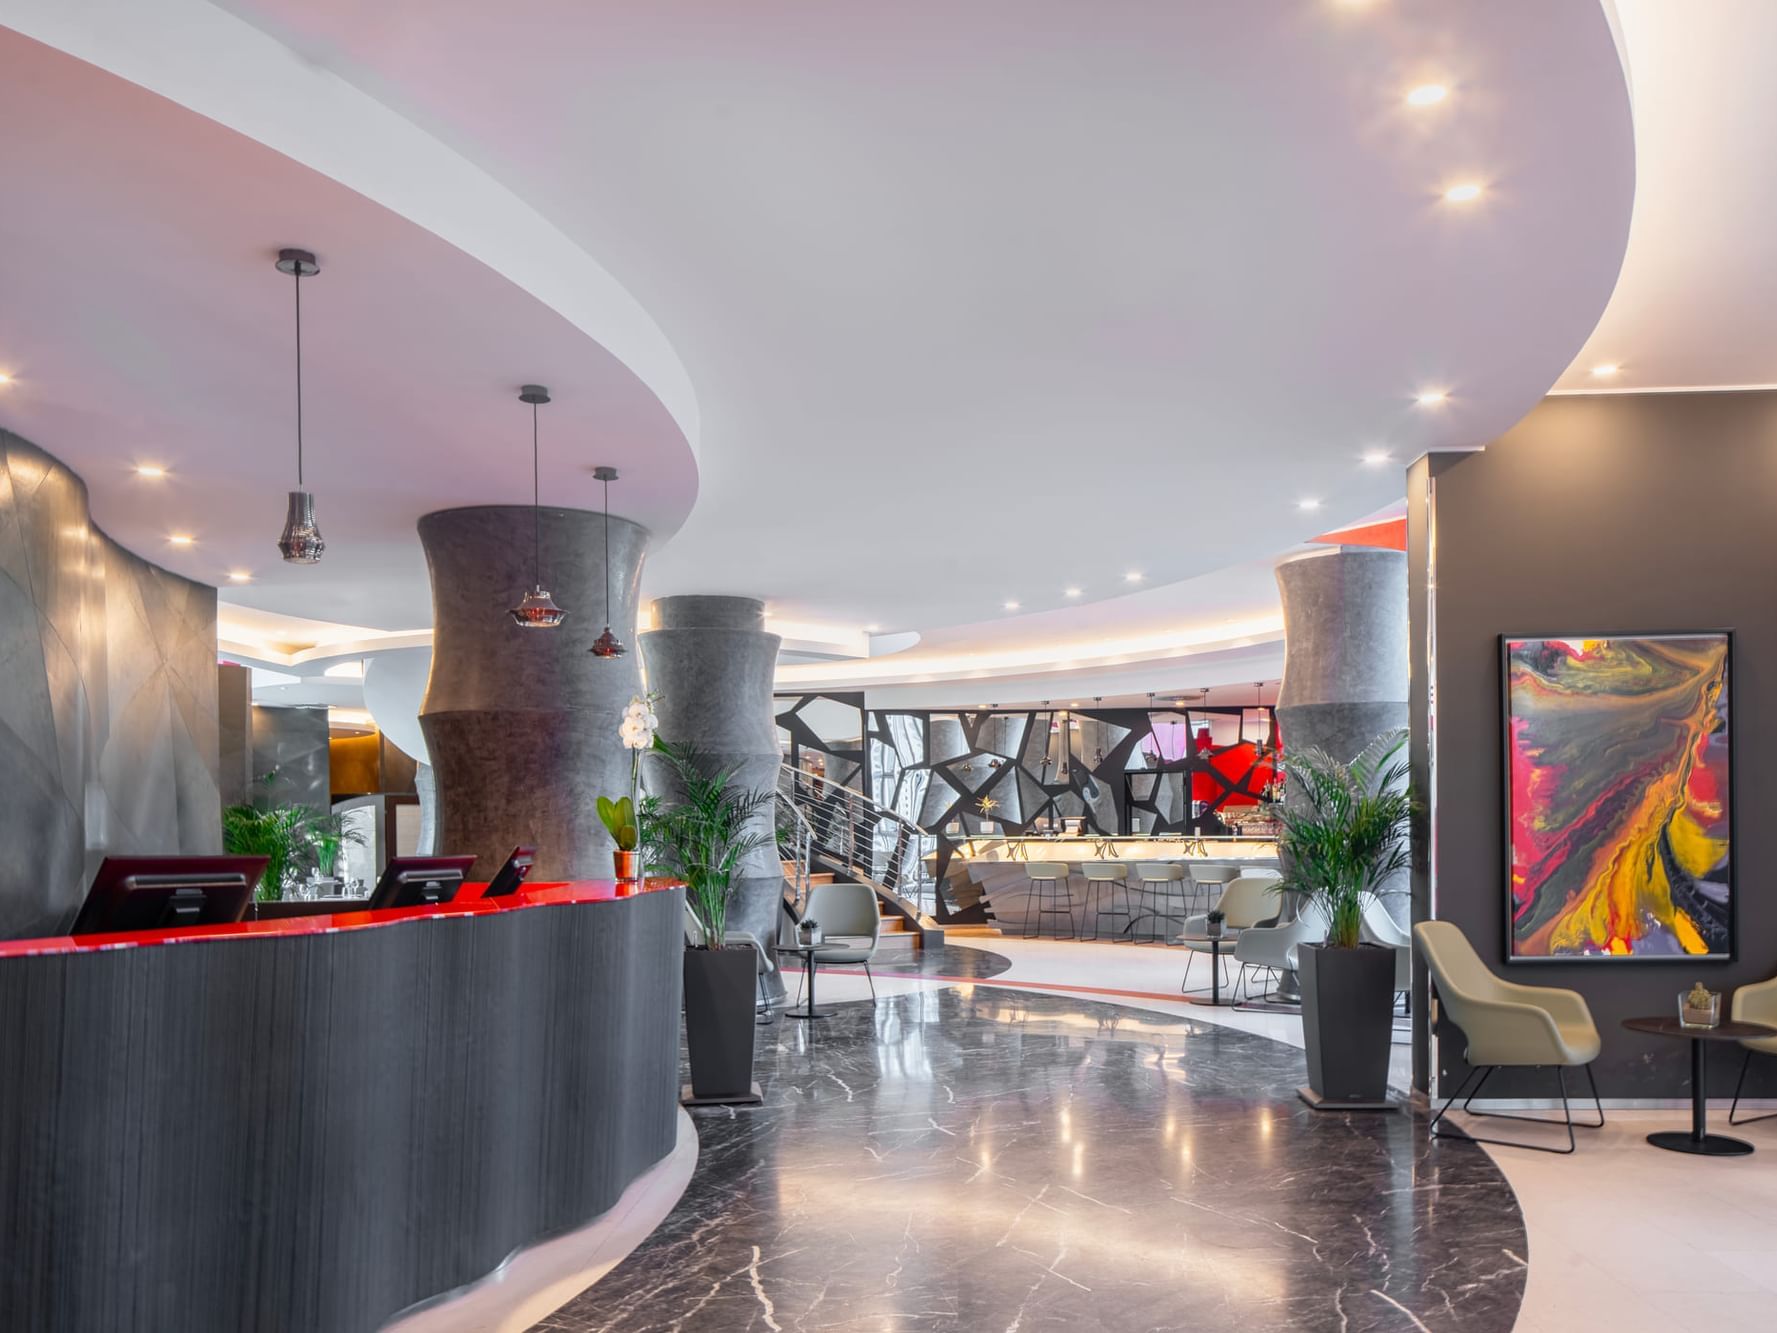 Welcome to UNAHOTELS Malpensa